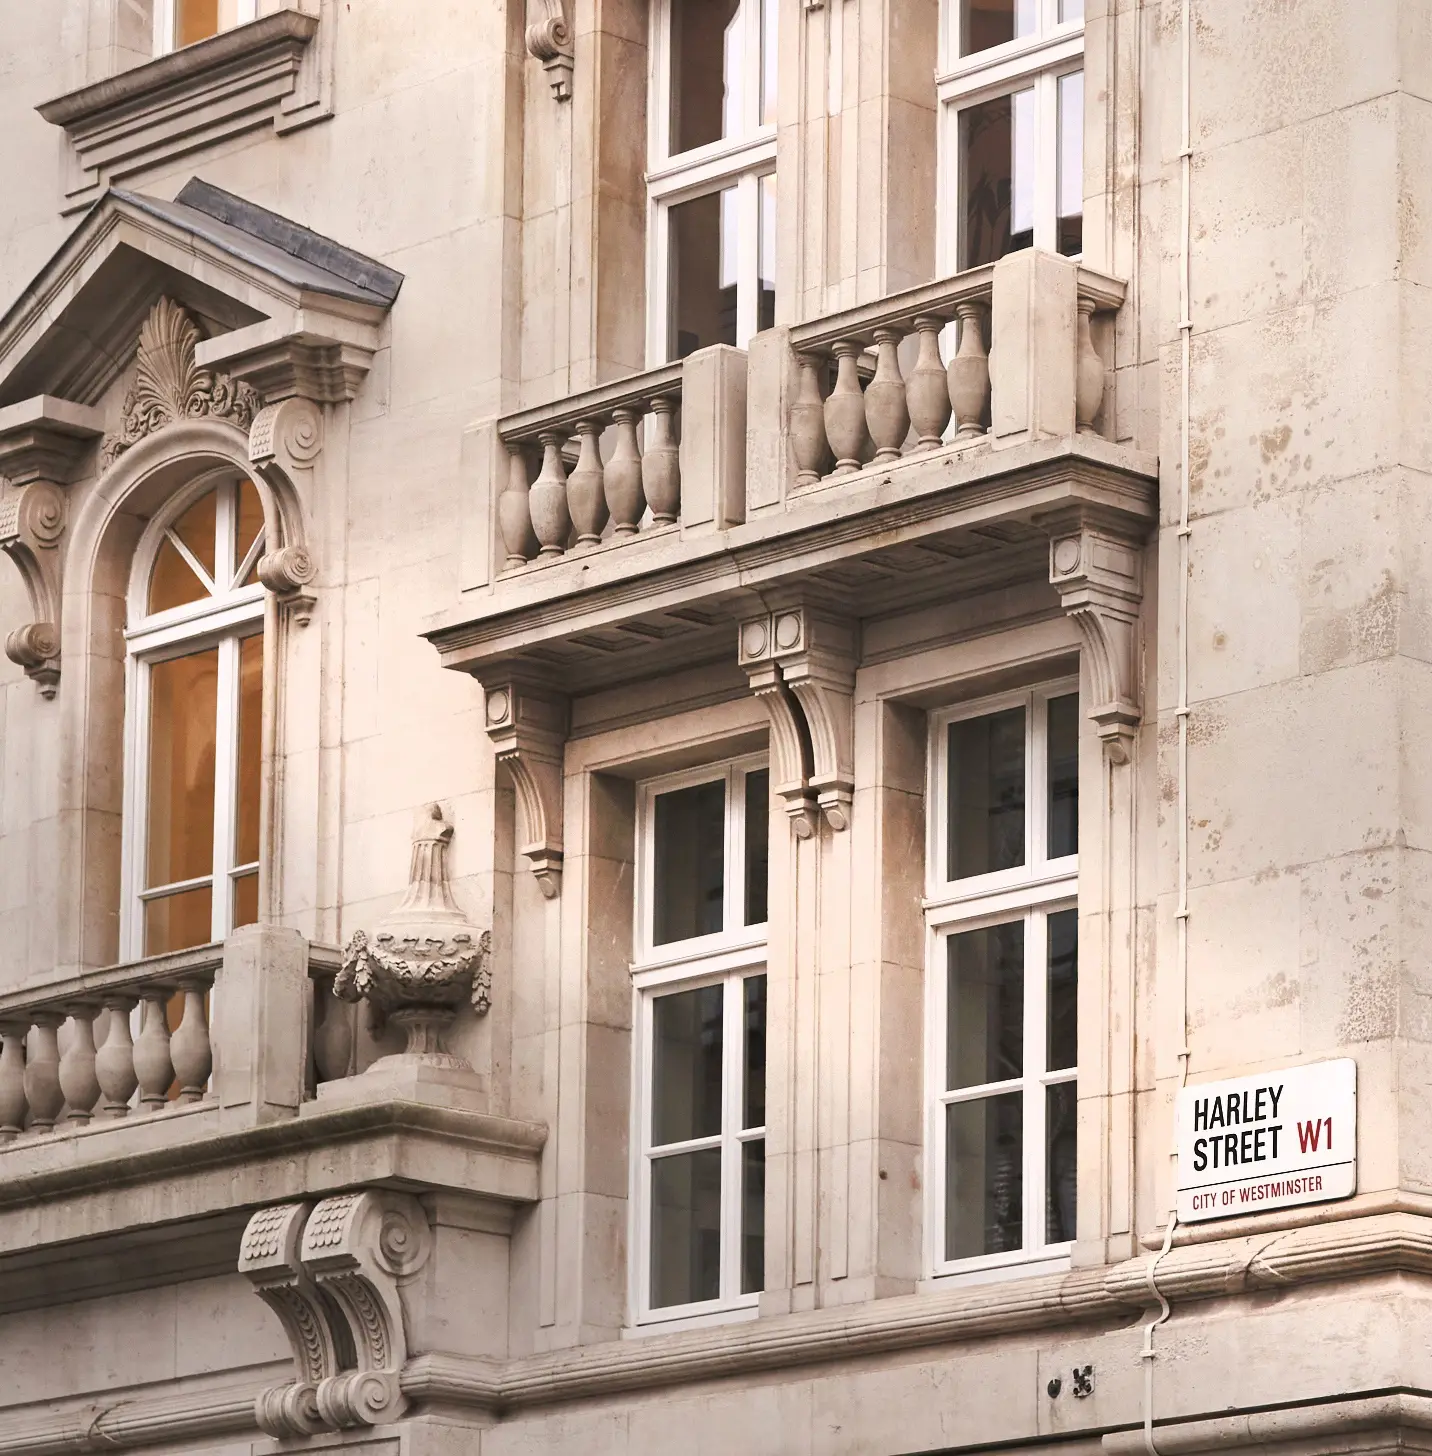 Building with Harley street sign